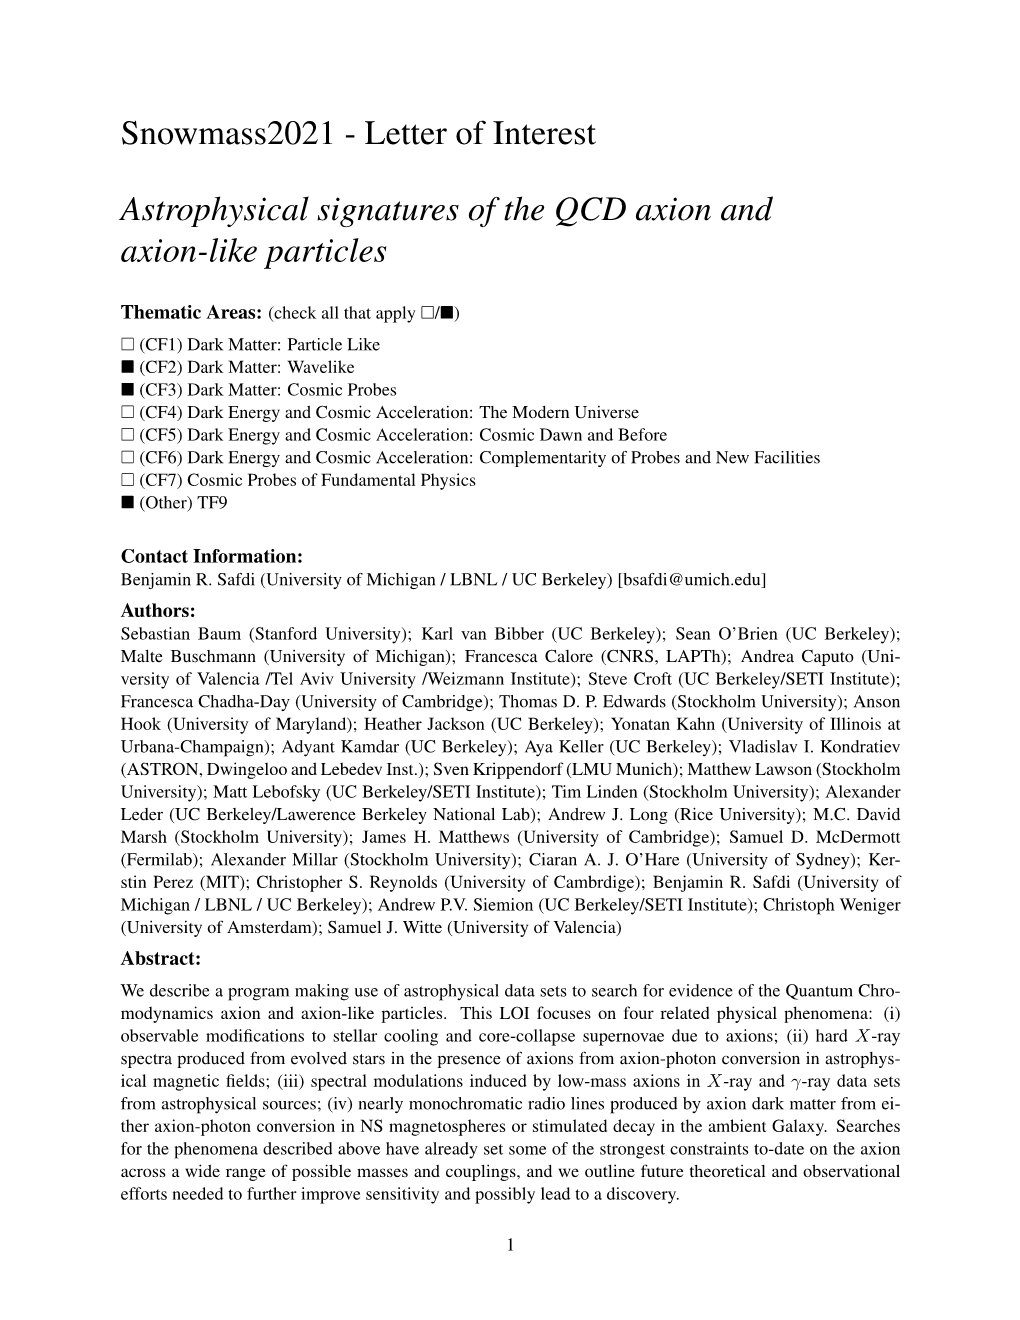 Letter of Interest Astrophysical Signatures of the QCD Axion And